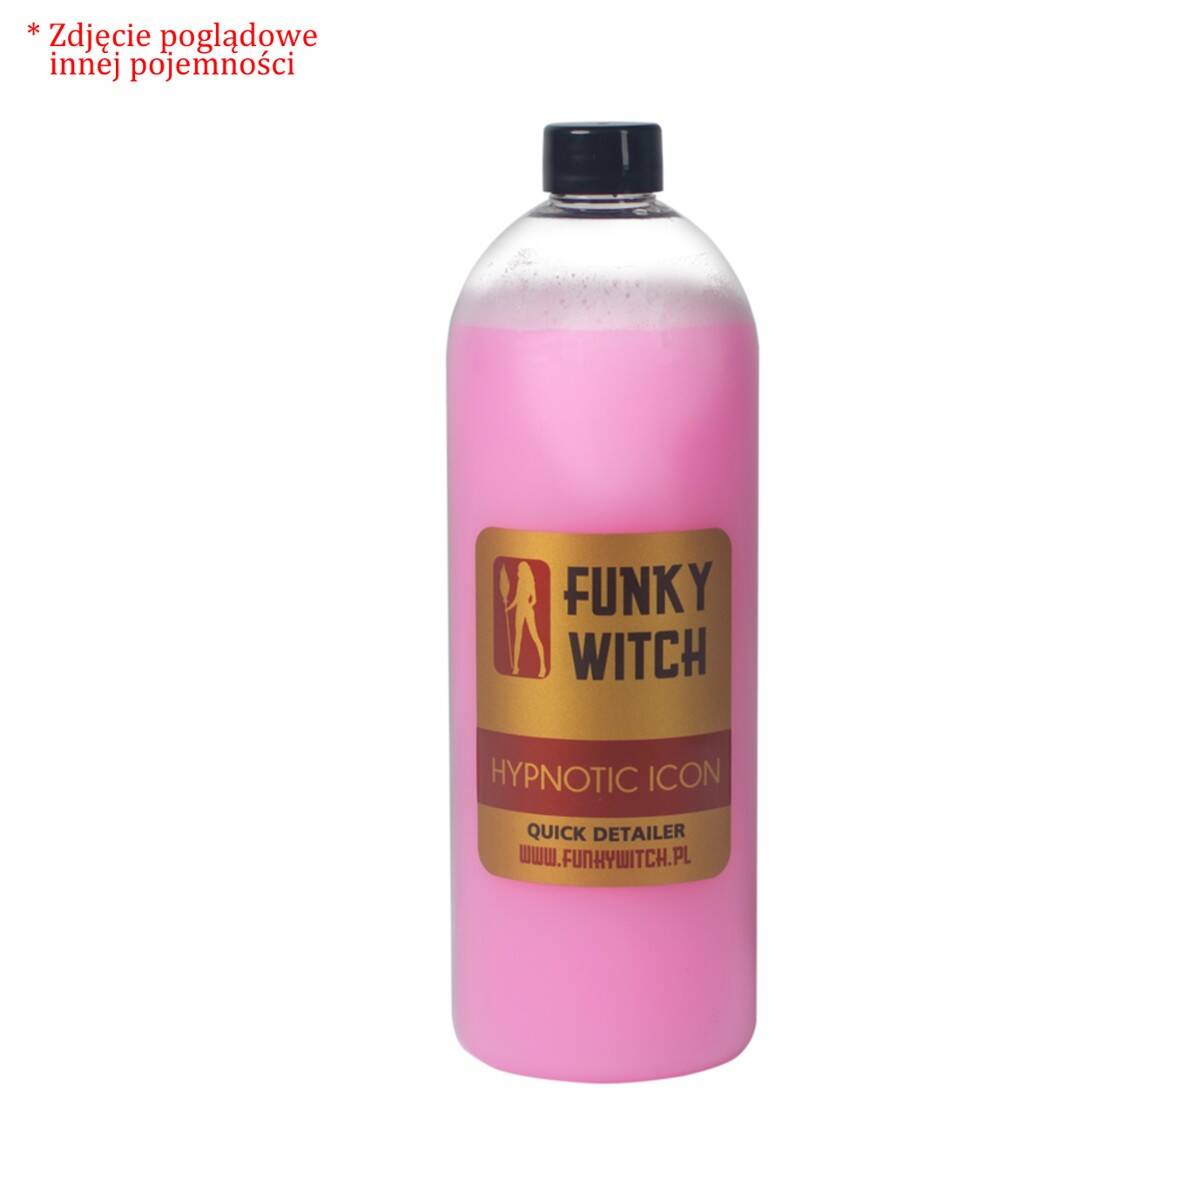 FUNKY WITCH Hypnotic Icon Quick Detailer 215ml Quick Detailer